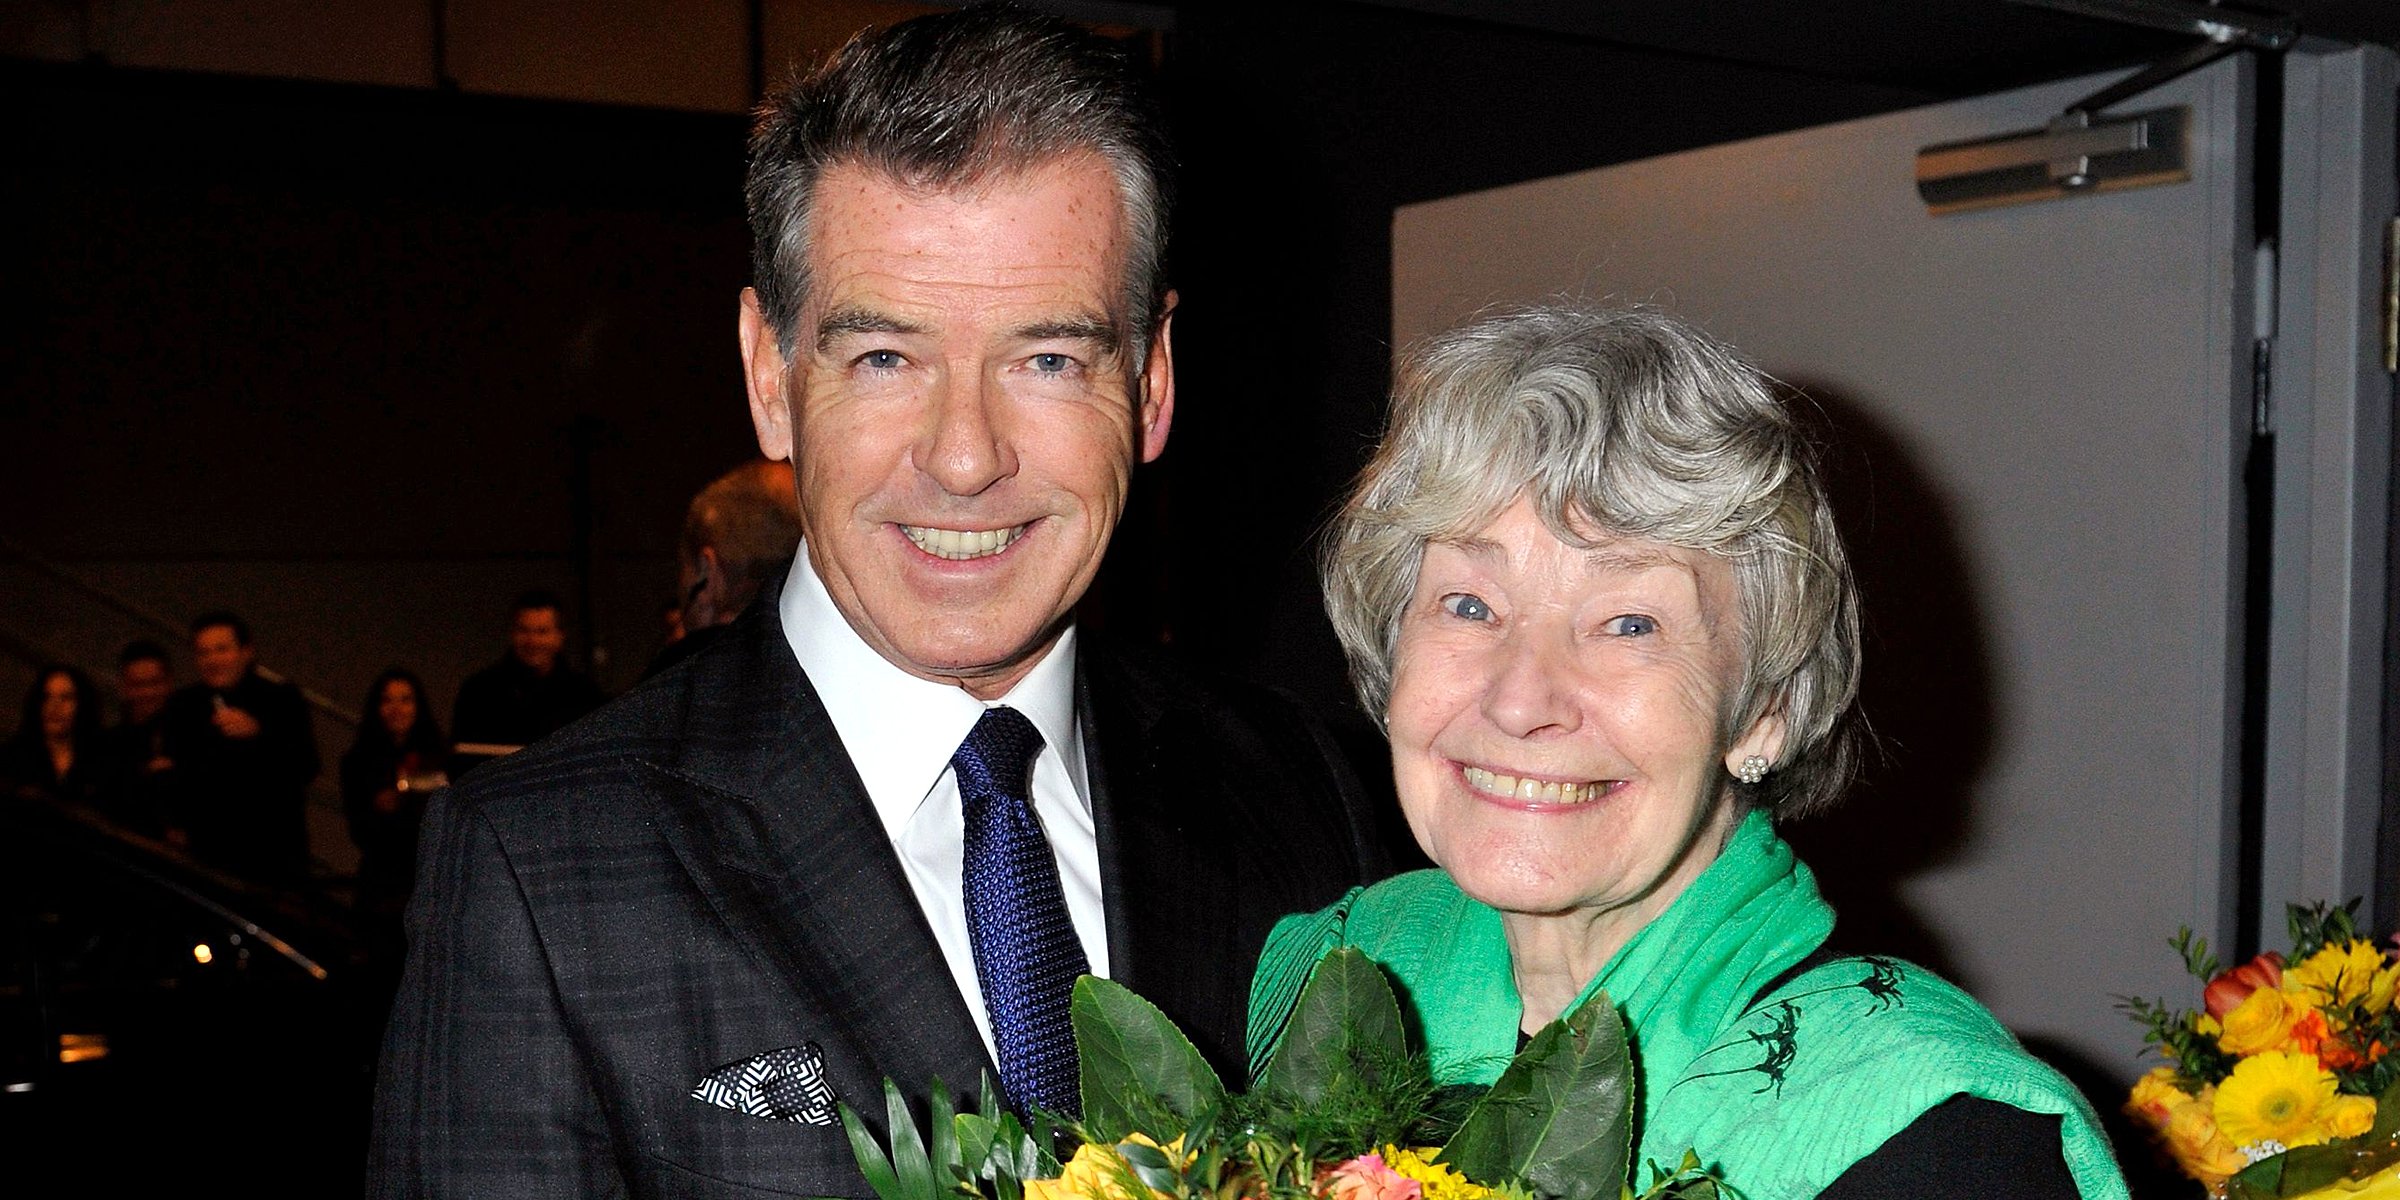 Pierce Brosnan and Mary May Smith | Source: Getty Images